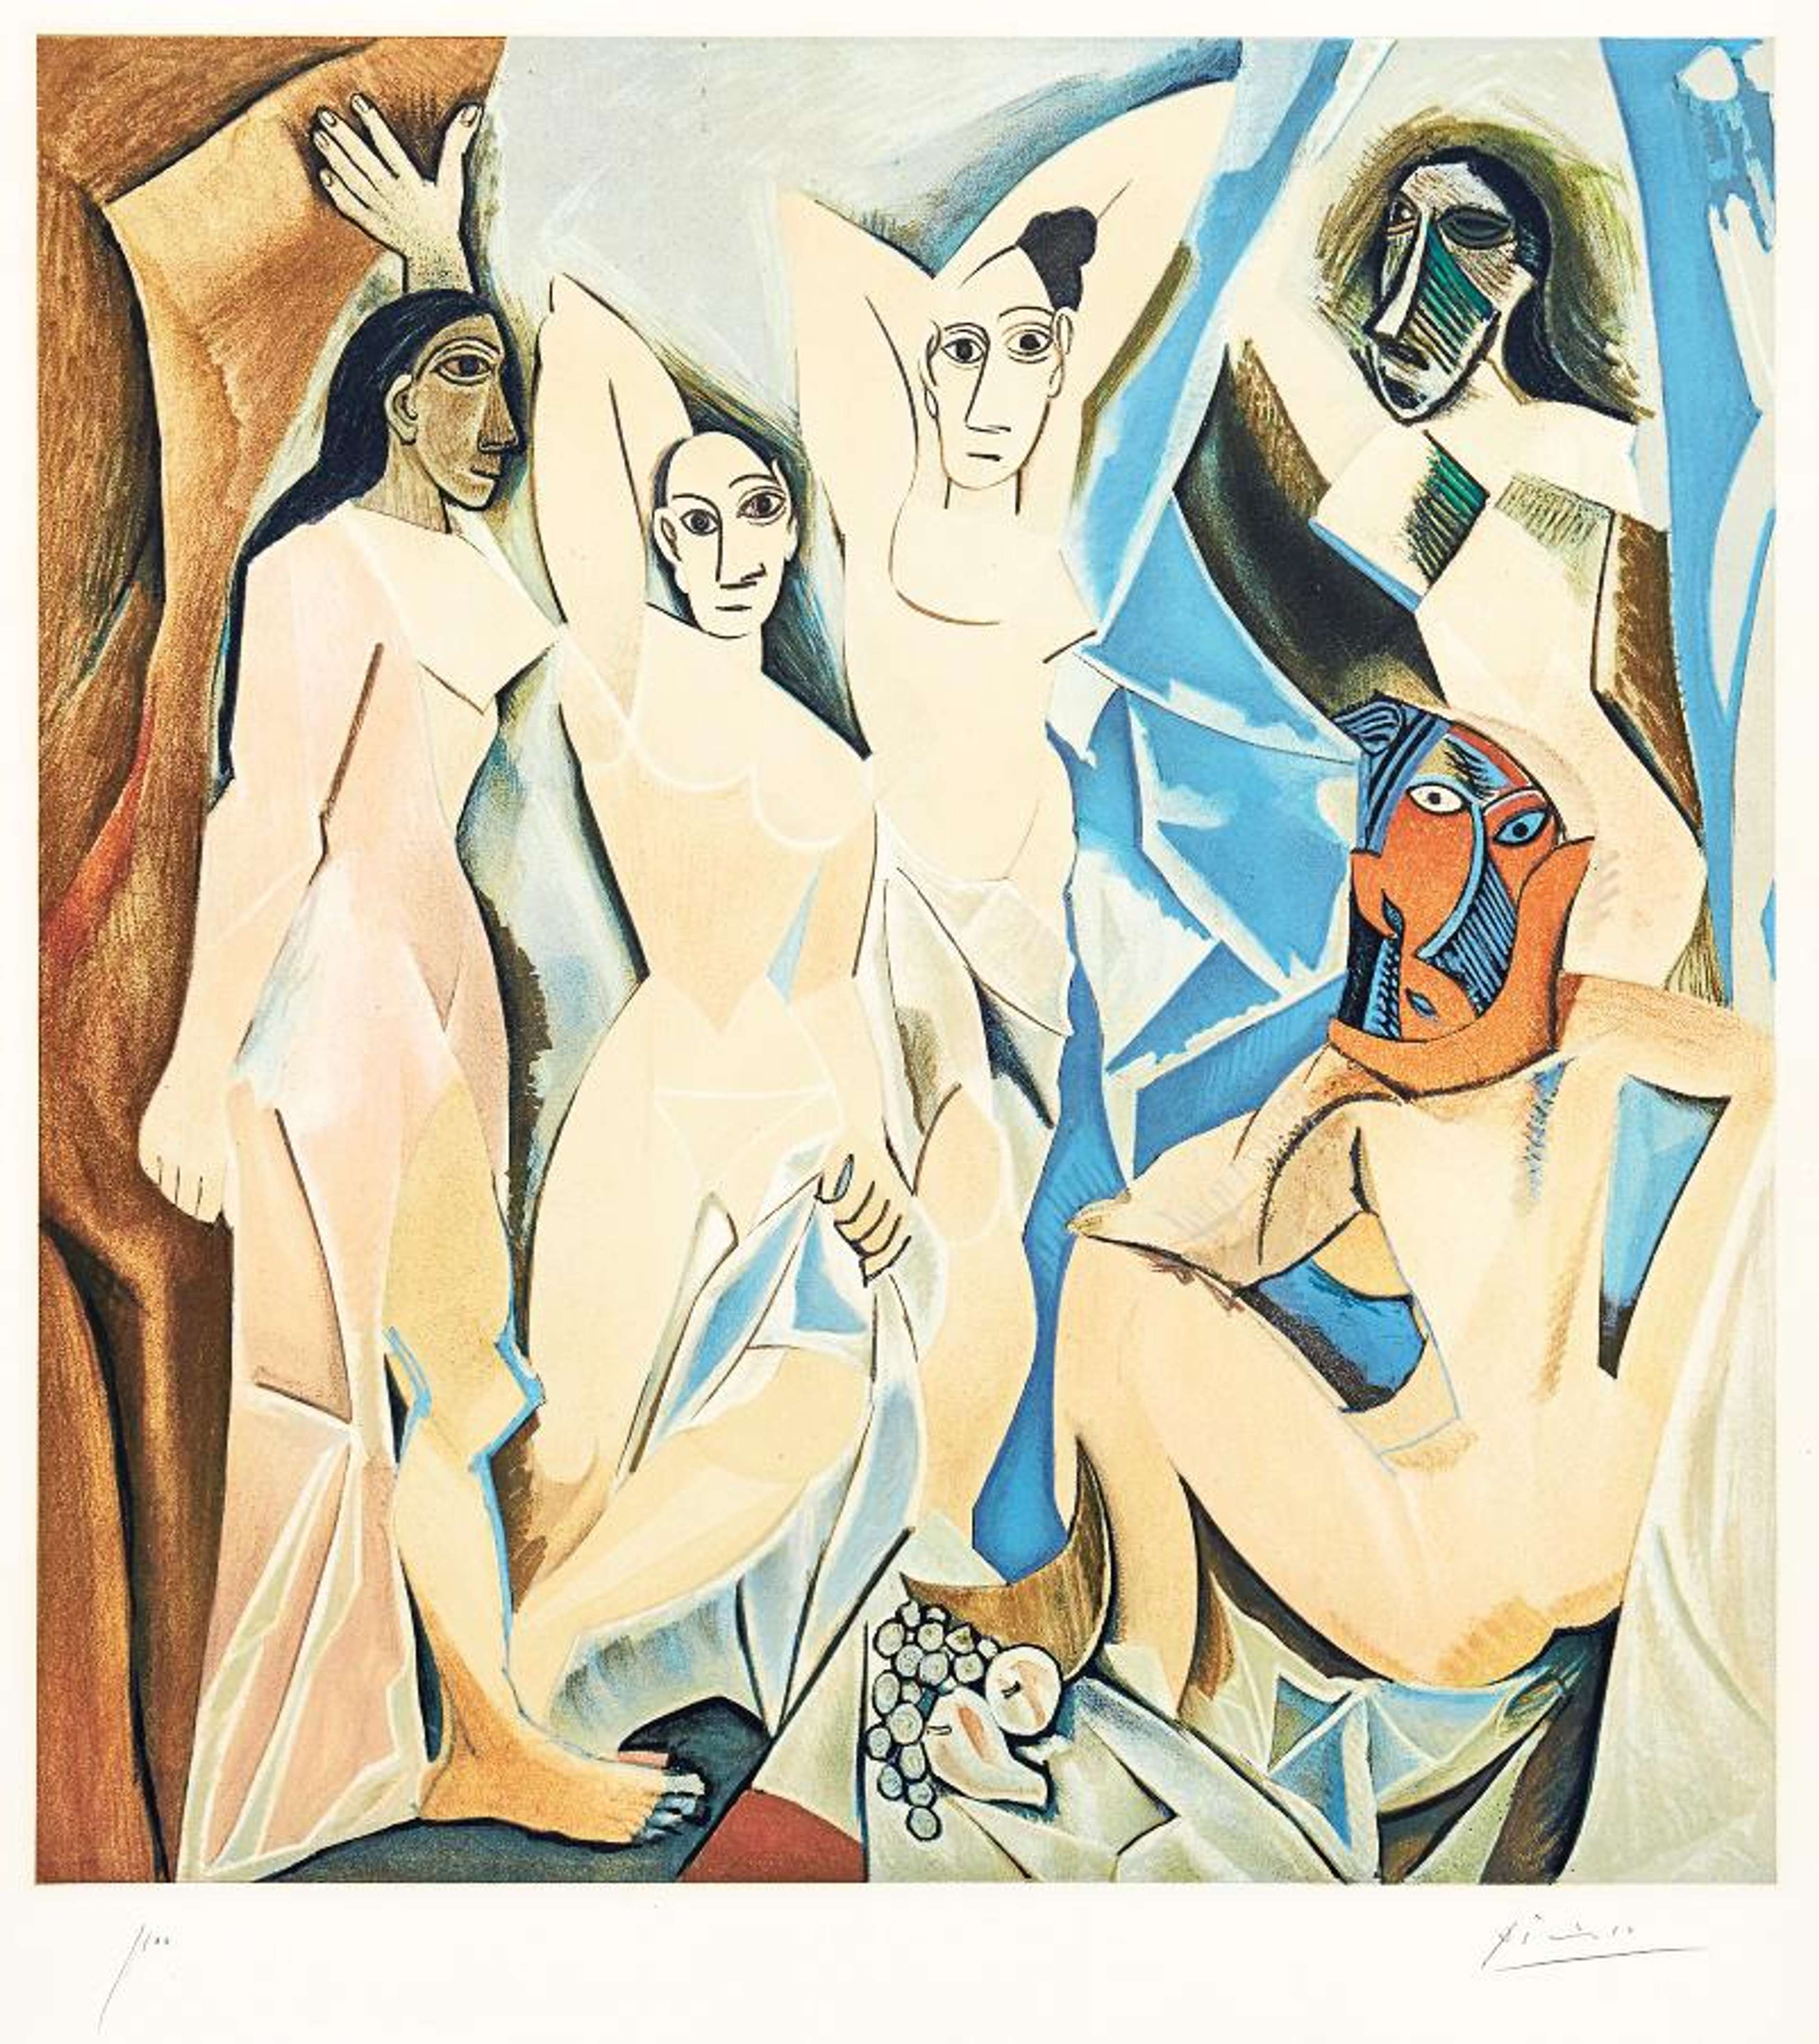 Pablo Picasso’s Les Demoiselles Avignon. A lithograph of a Cubist painting depicting five nude women in a room with draped sheets. A bowl of fruit is on the floor in the centre of the women.